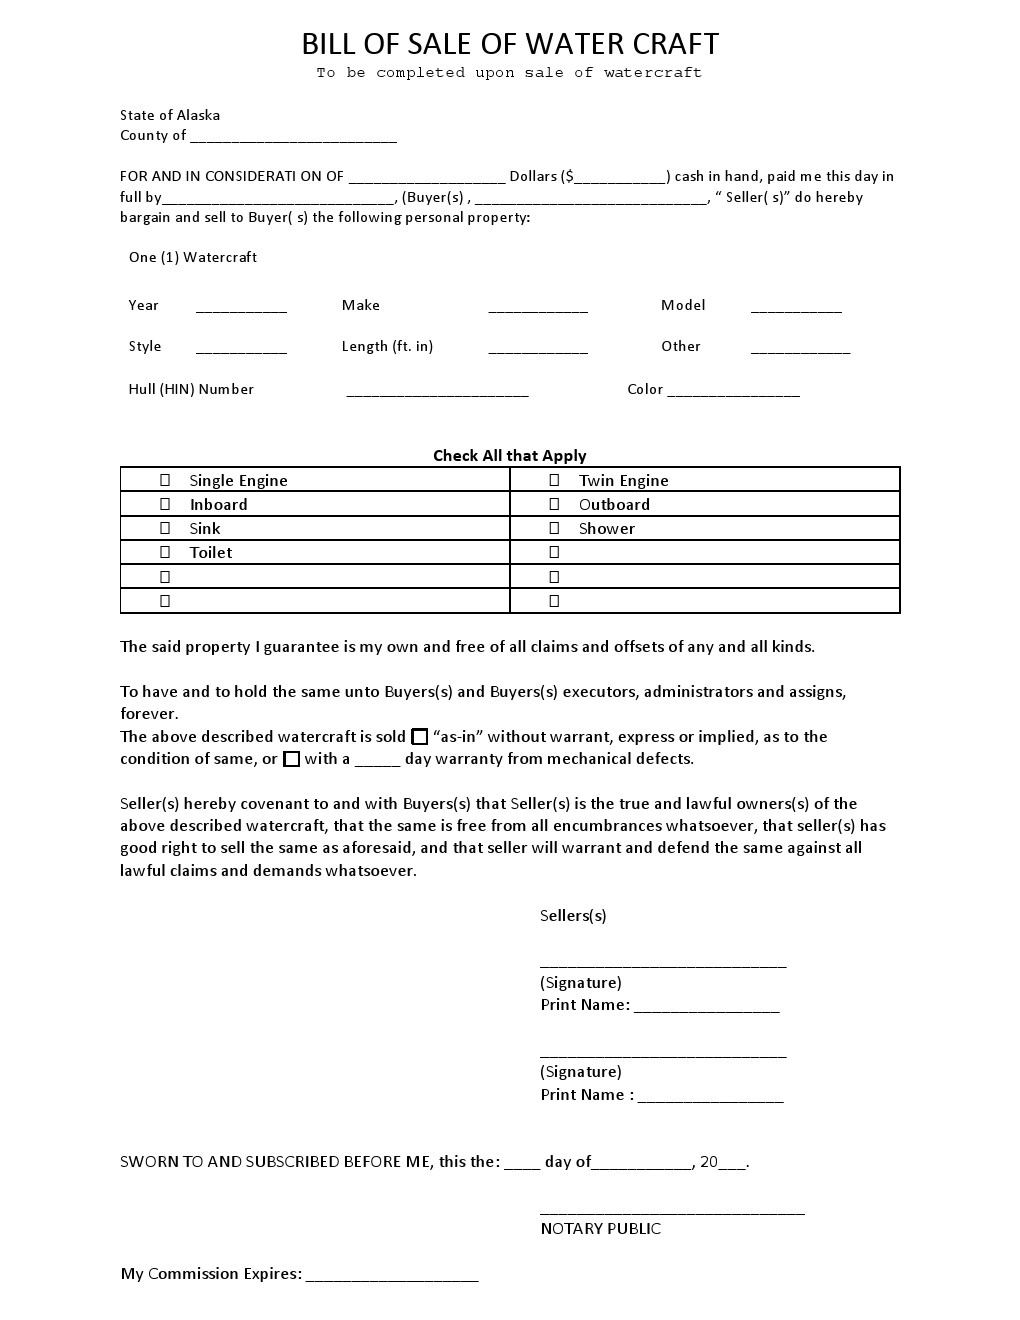 basic notarized bill of sale